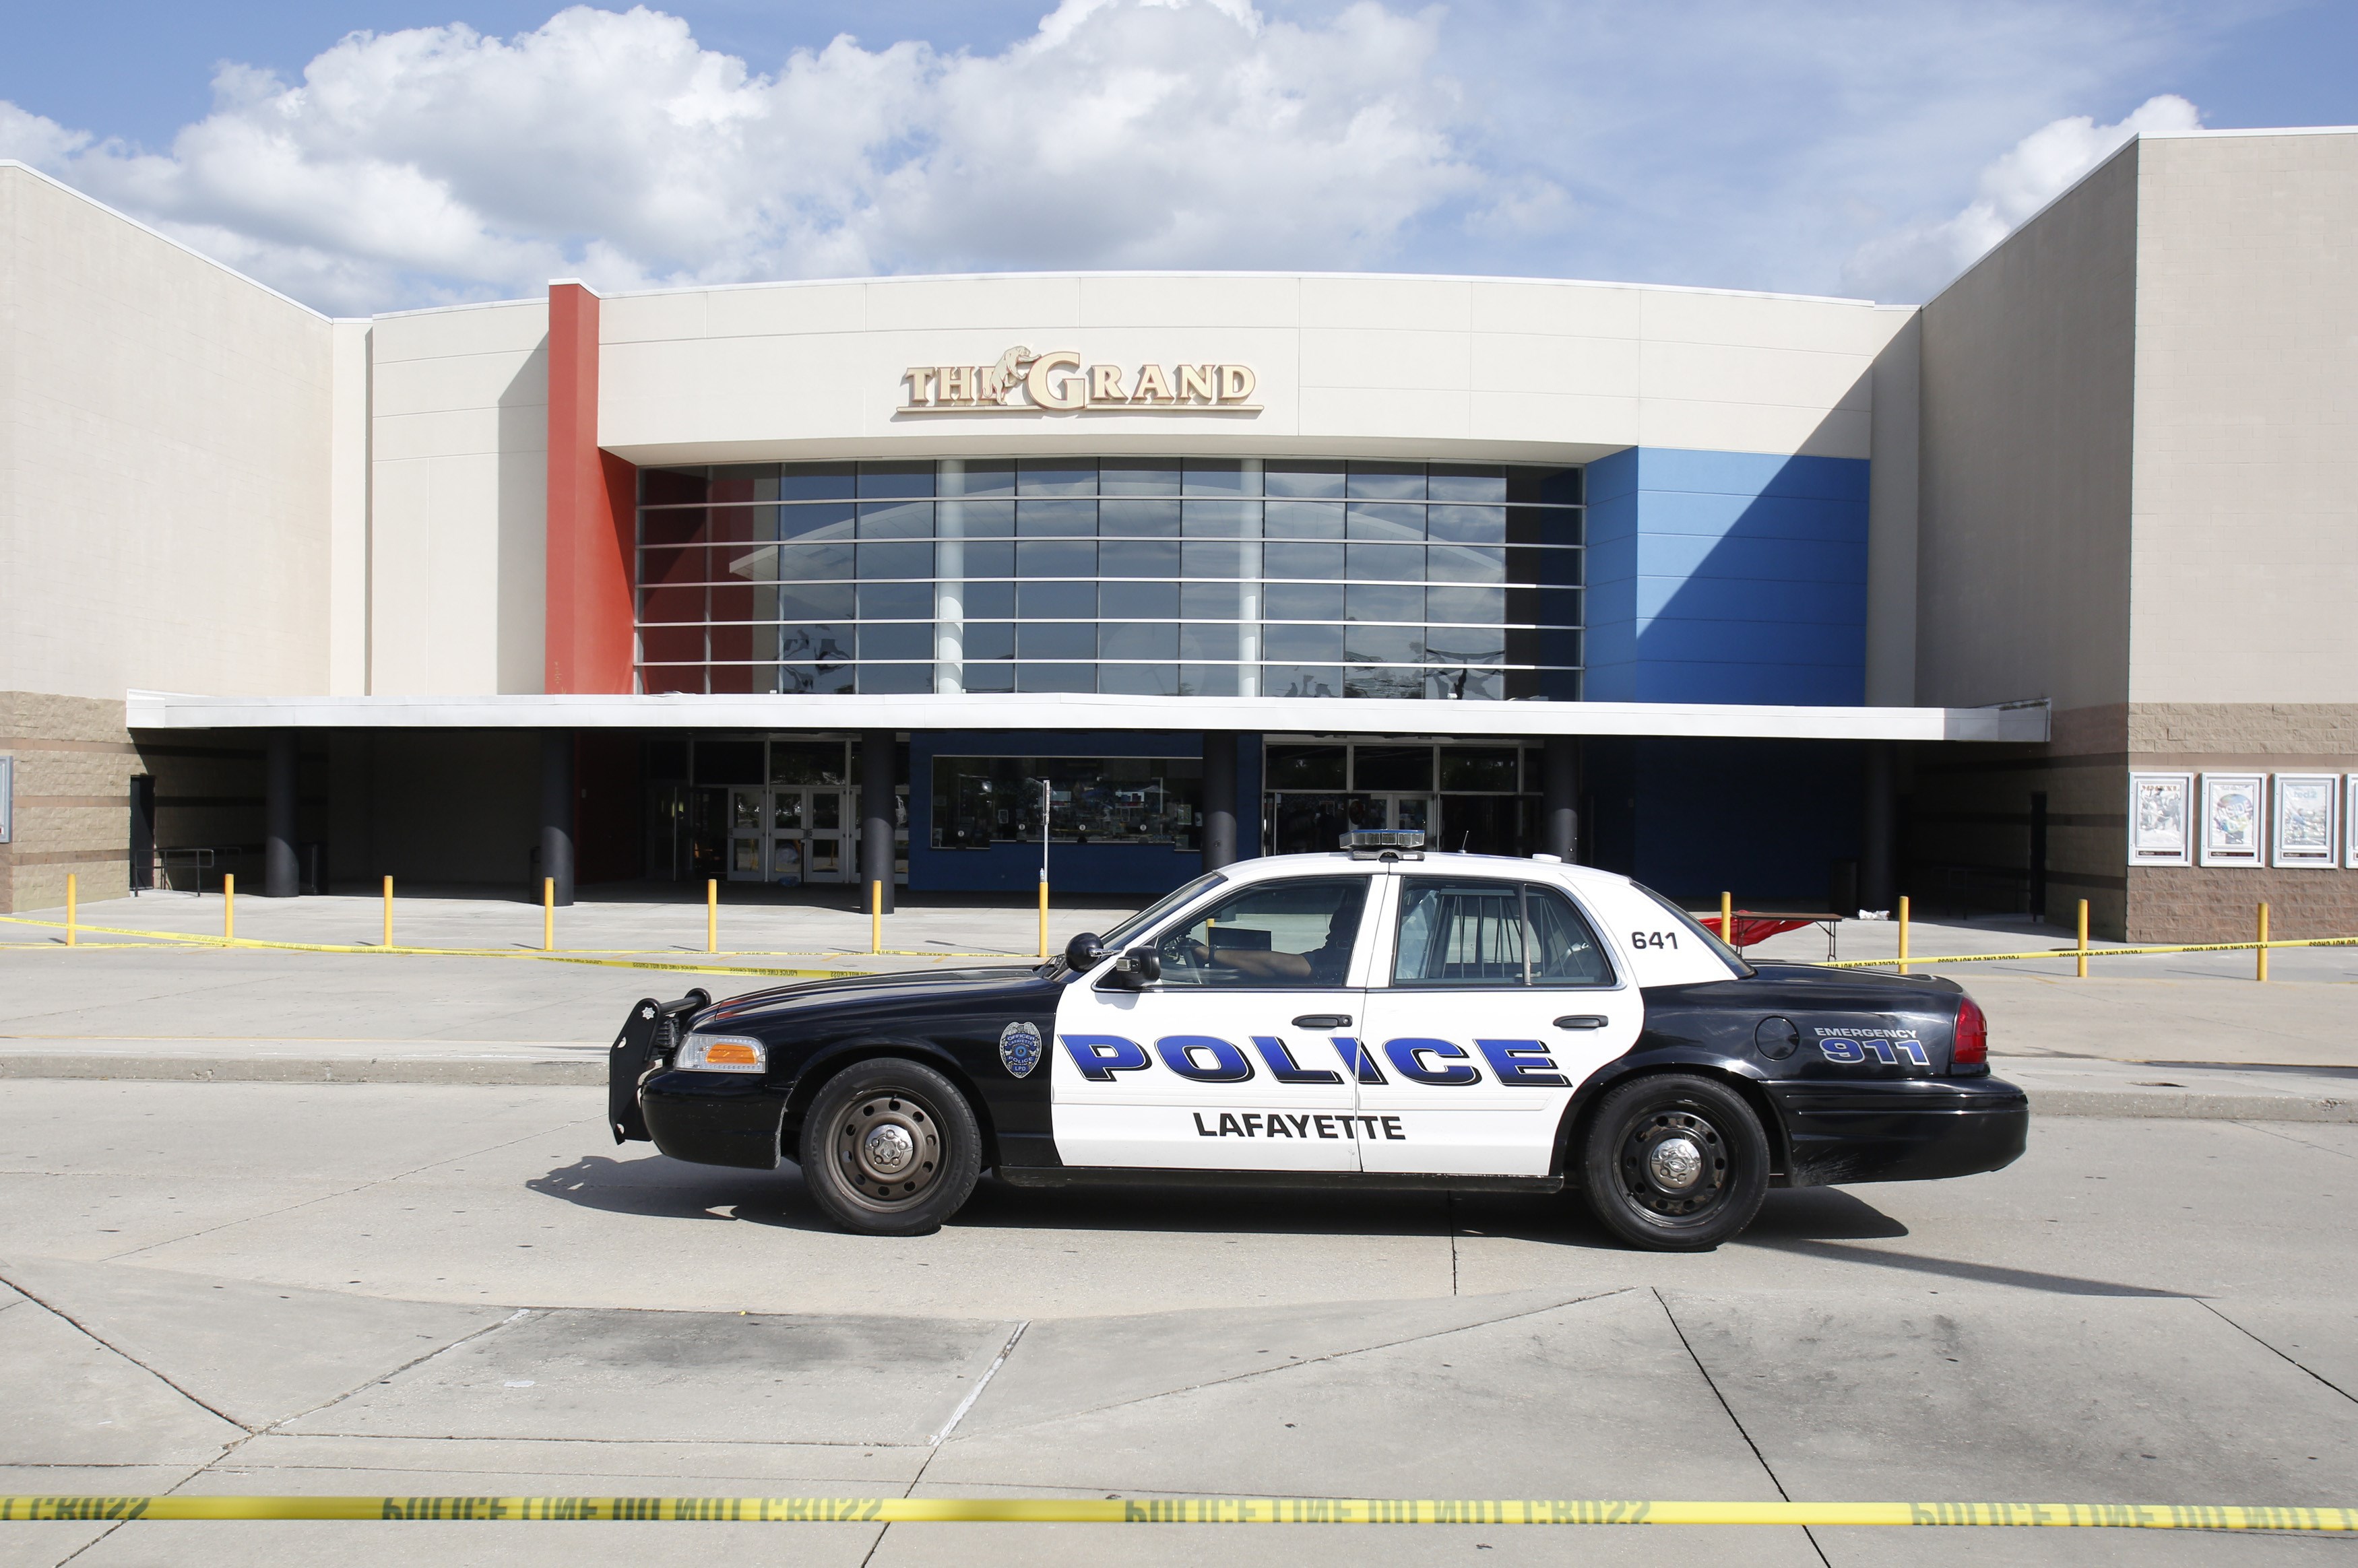 A police car stands outside The Grand Theatre on July 24, 2015 in Lafayette, La., following the previous night's deadly shooting. (Yuri Gripas&mdash;AFP/Getty Images)